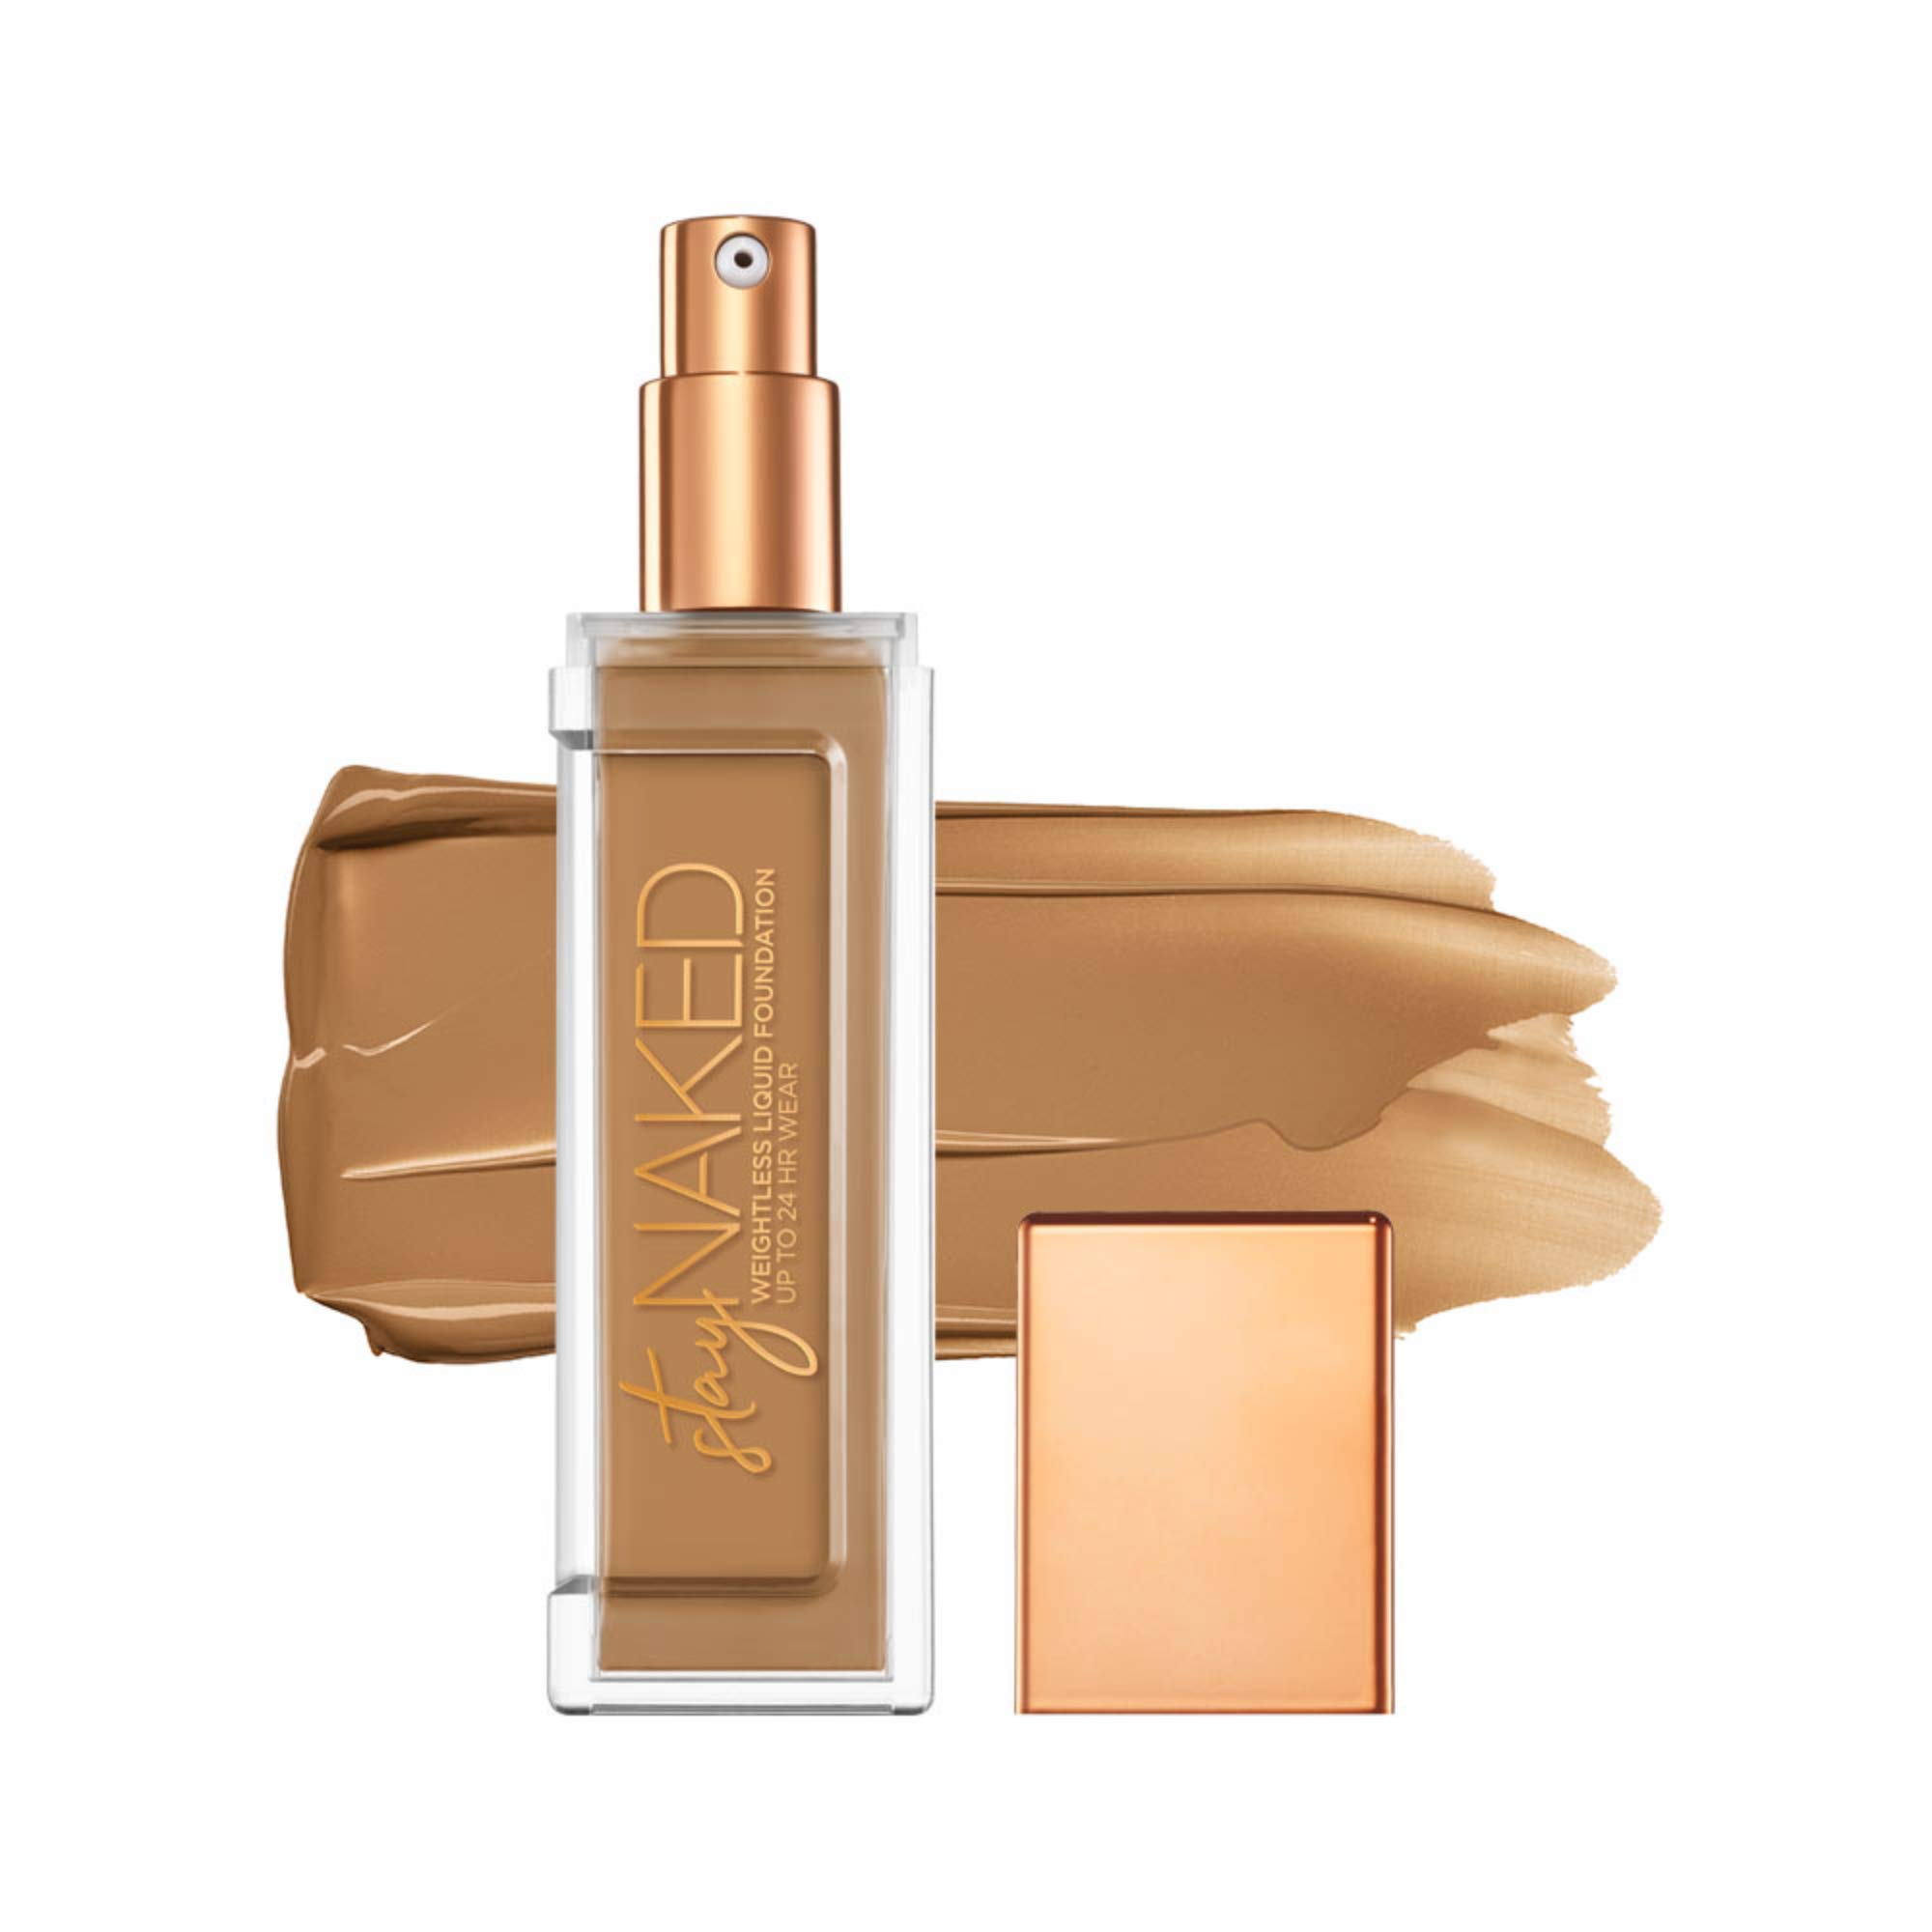 URBAN DECAY Stay Naked Weightless Liquid Foundation - Buildable Coverage with No Caking - Matte Finish Lasts Up To 24 Hours - Waterproof & Sweatproof - 1.0 oz